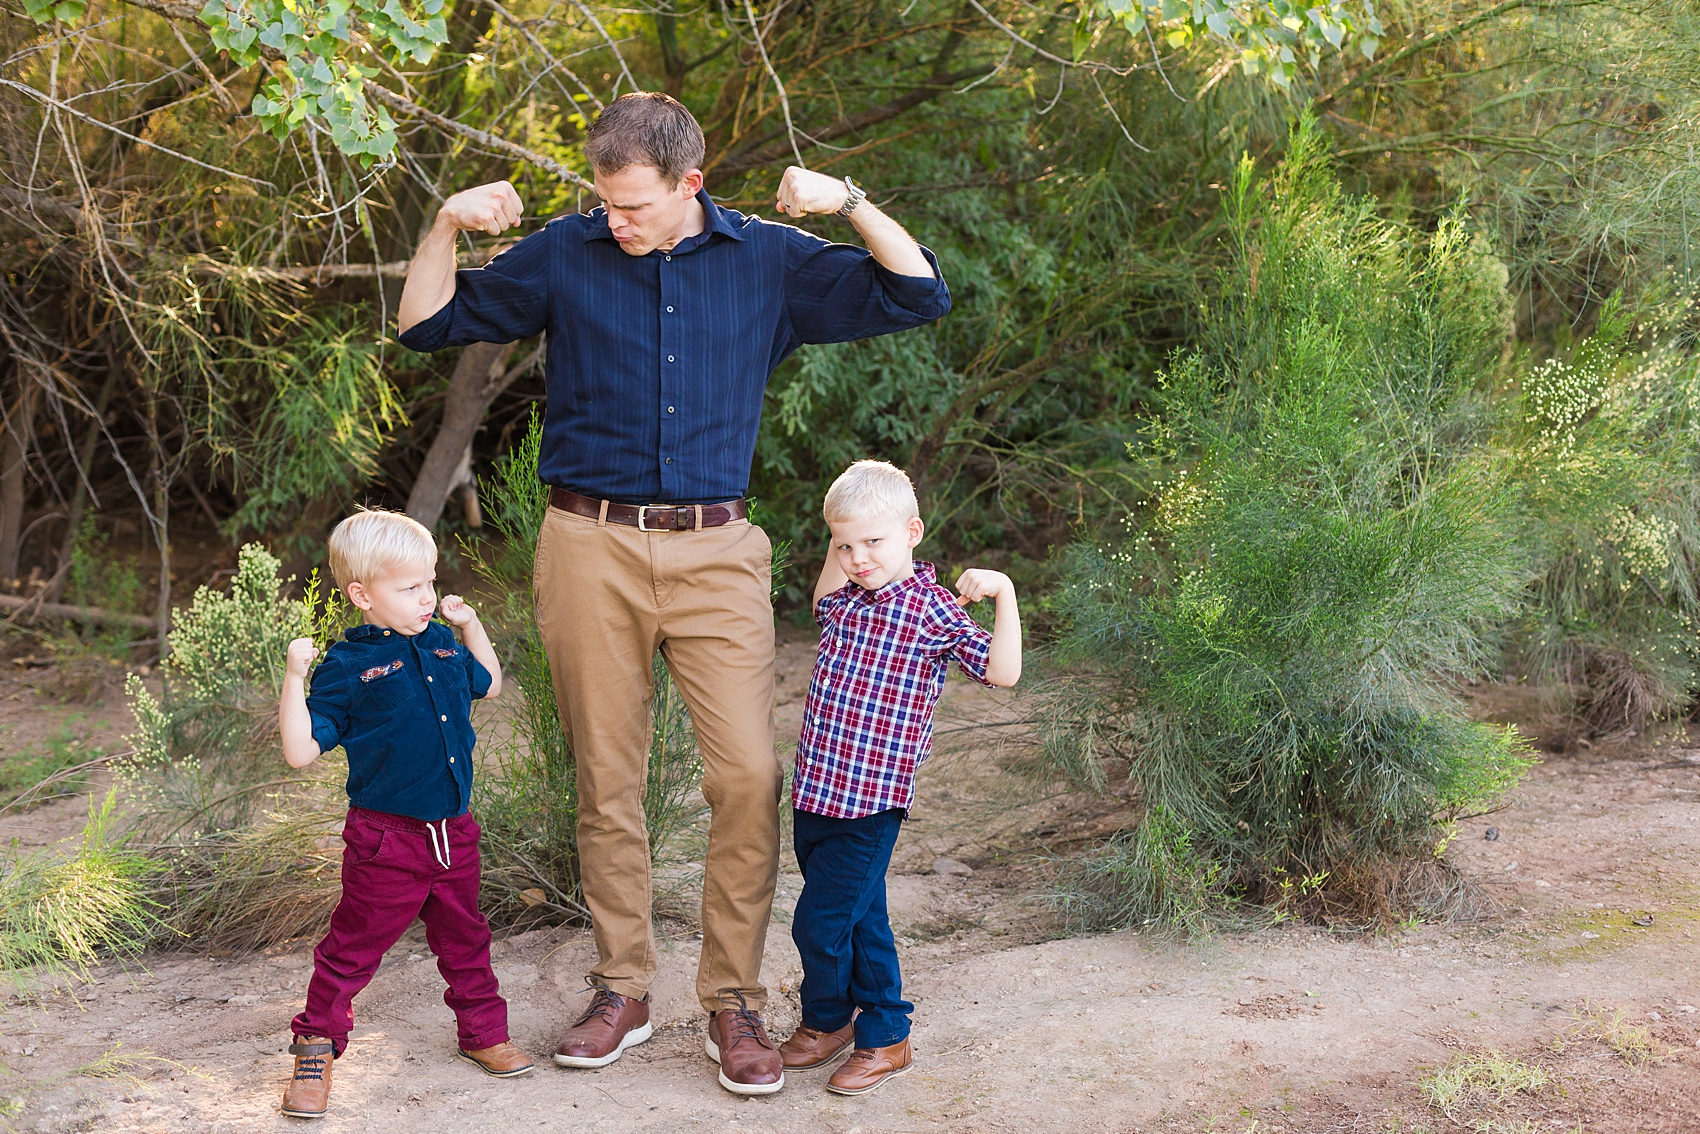 Leah Hope Photography | Scottsdale Phoenix Arizona | Nature Greenery | Family Pictures | What to Wear | Family Poses | Children | Fall